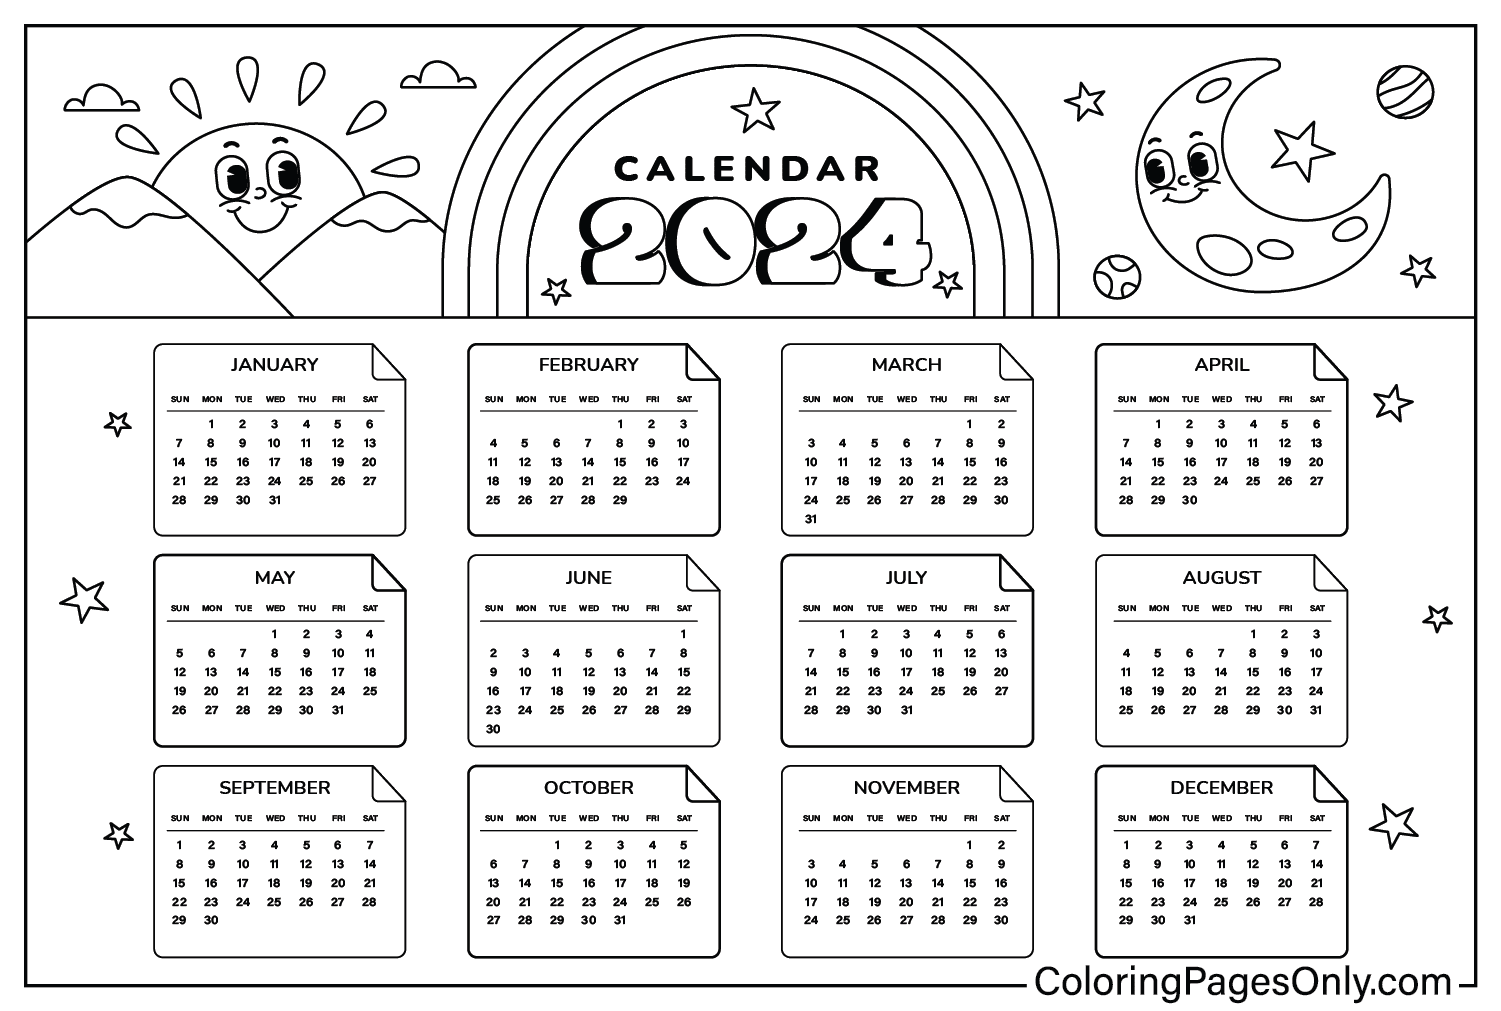 Calendar 2024 to Color Free Printable Coloring Pages